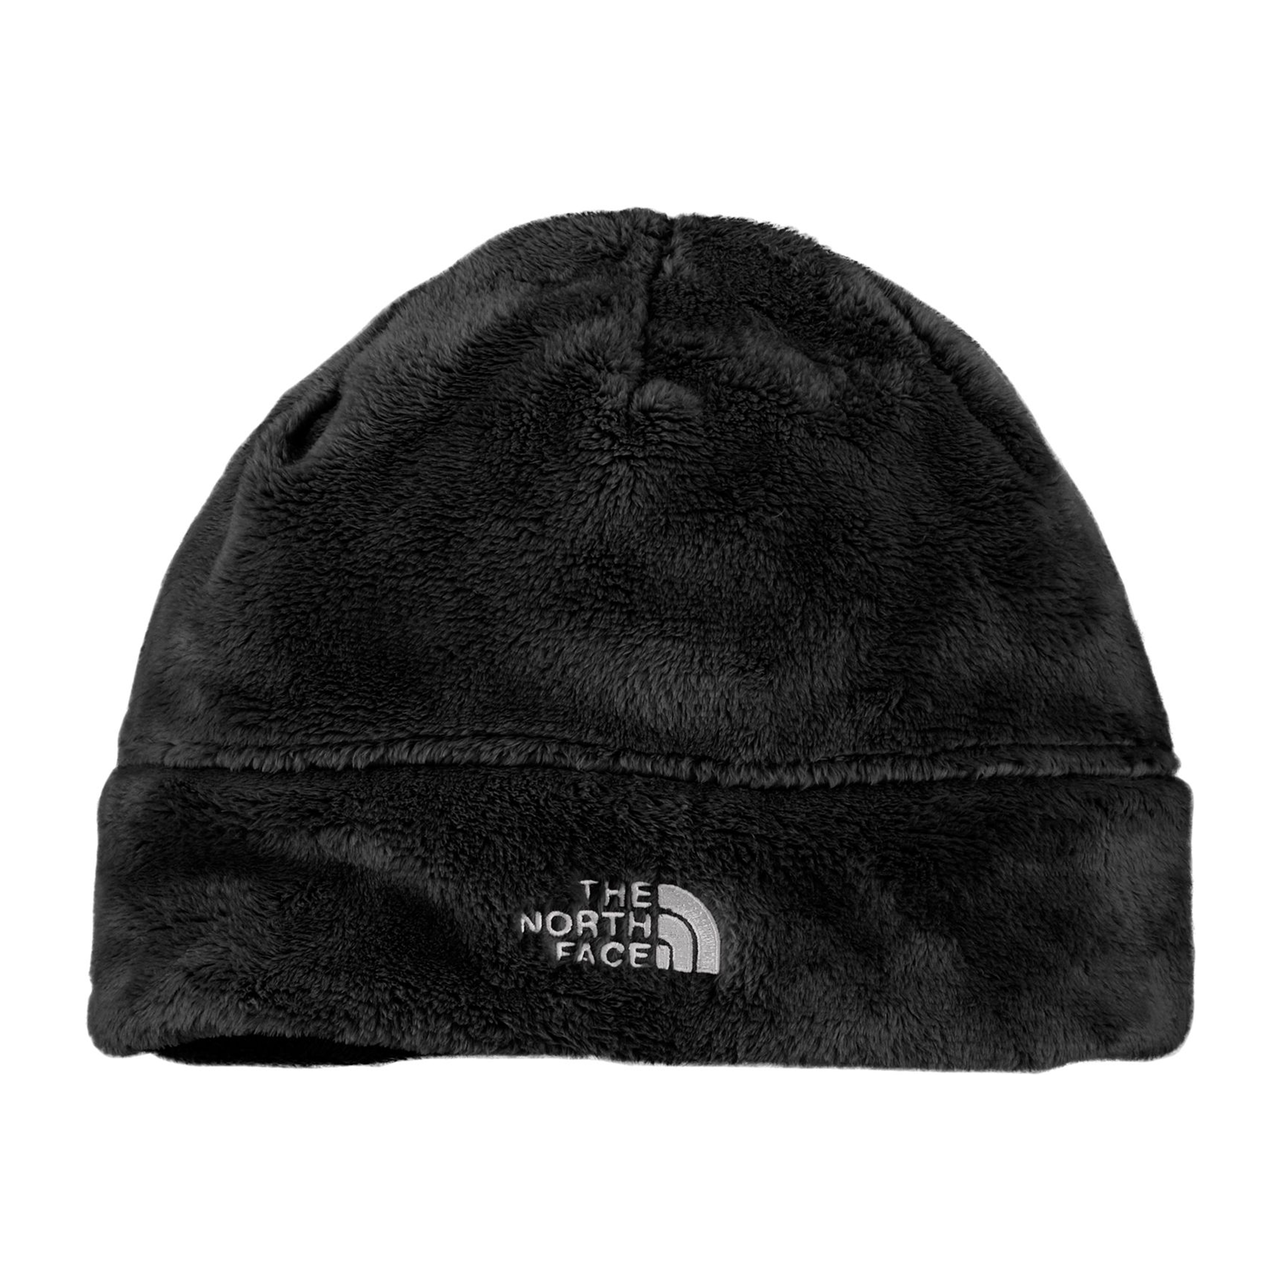 The North Face Denali Thermal Beanie The North Face ktmart.vn 3